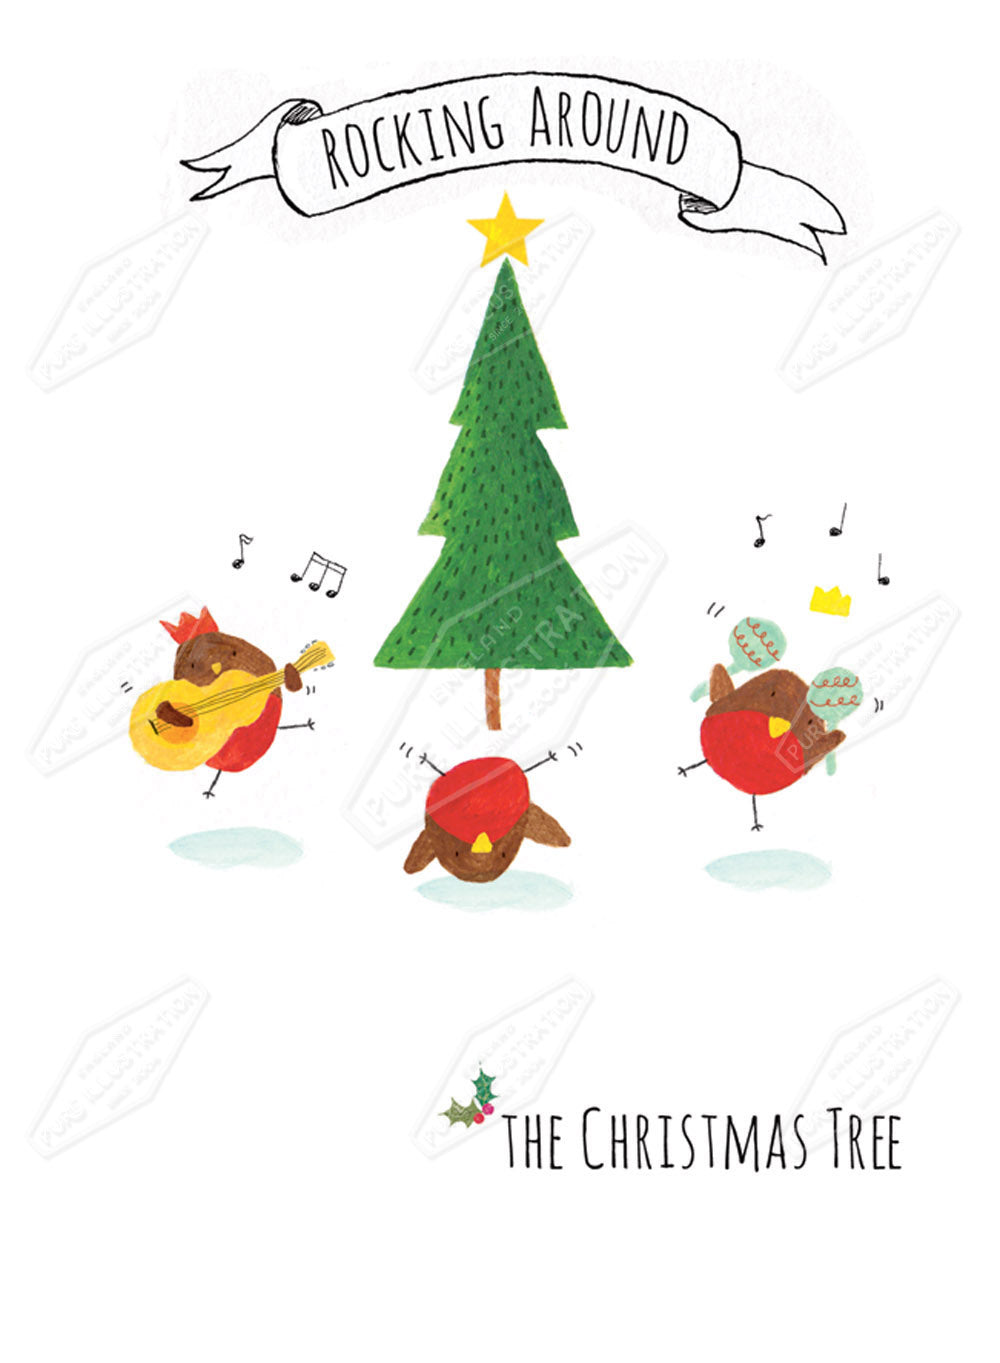 00029607CRE - Rocking around the christmas tree Robins Christmas Illustration for Greeting Cards by Cory Reid for Pure Art Licensing Agency